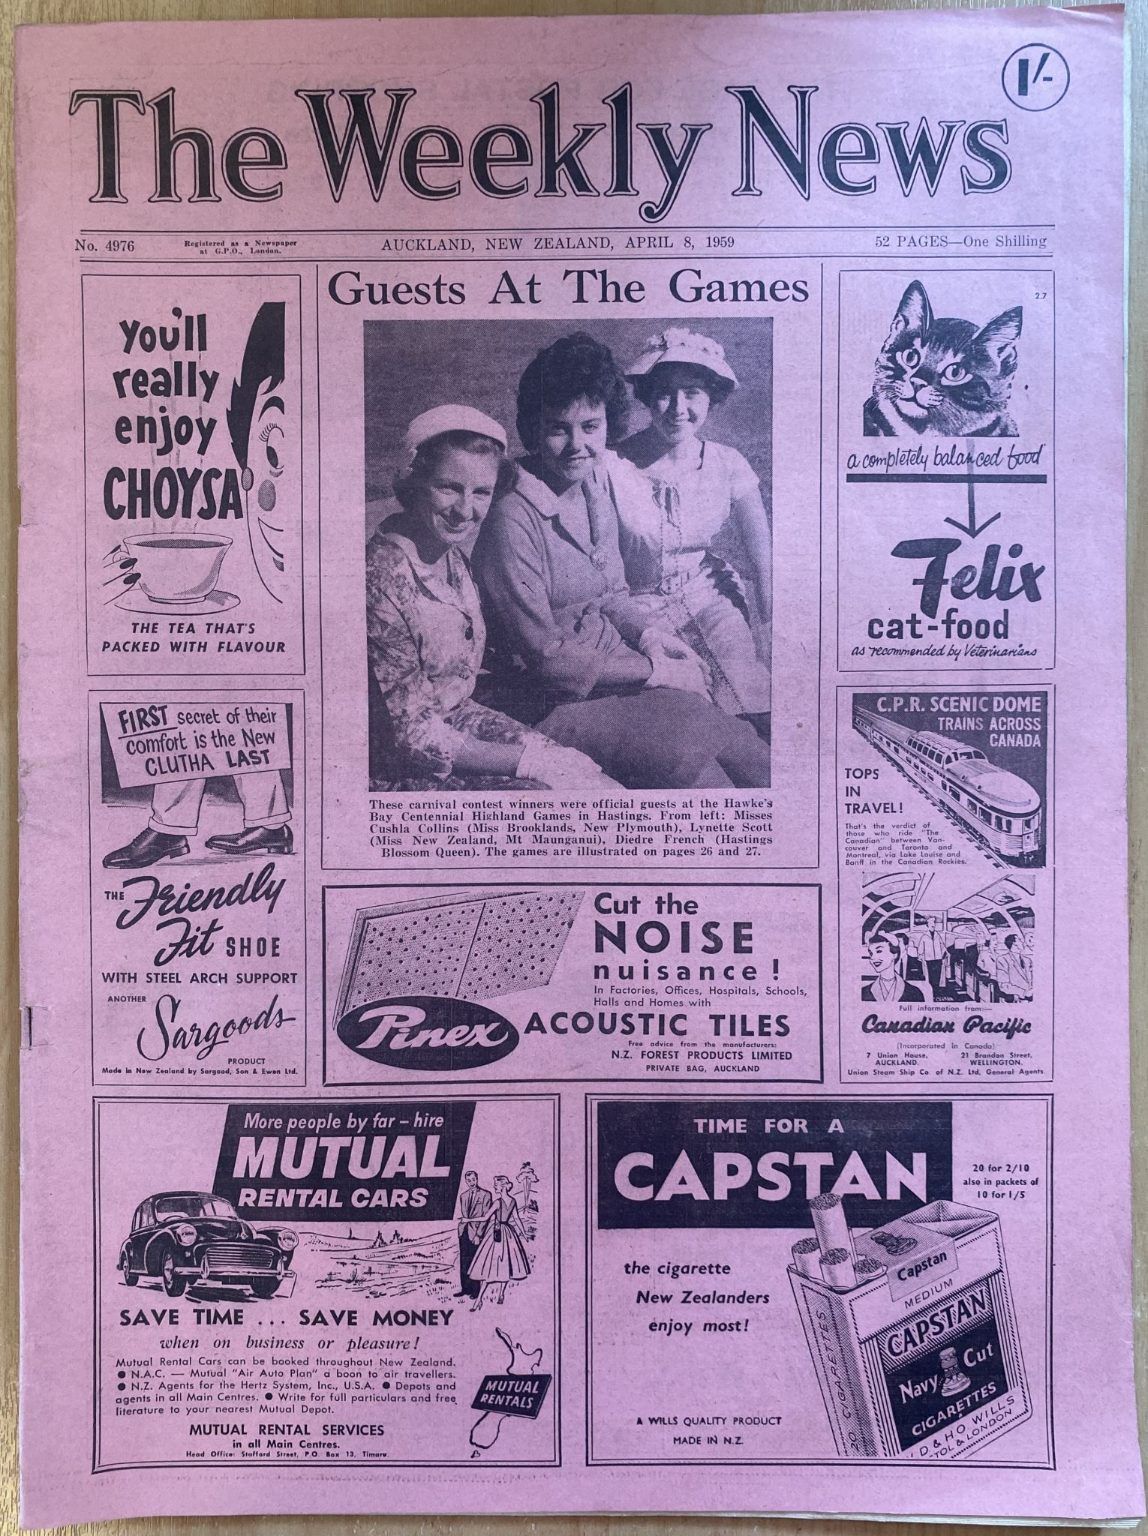 OLD NEWSPAPER: The Weekly News - No. 4976, 8 April 1959